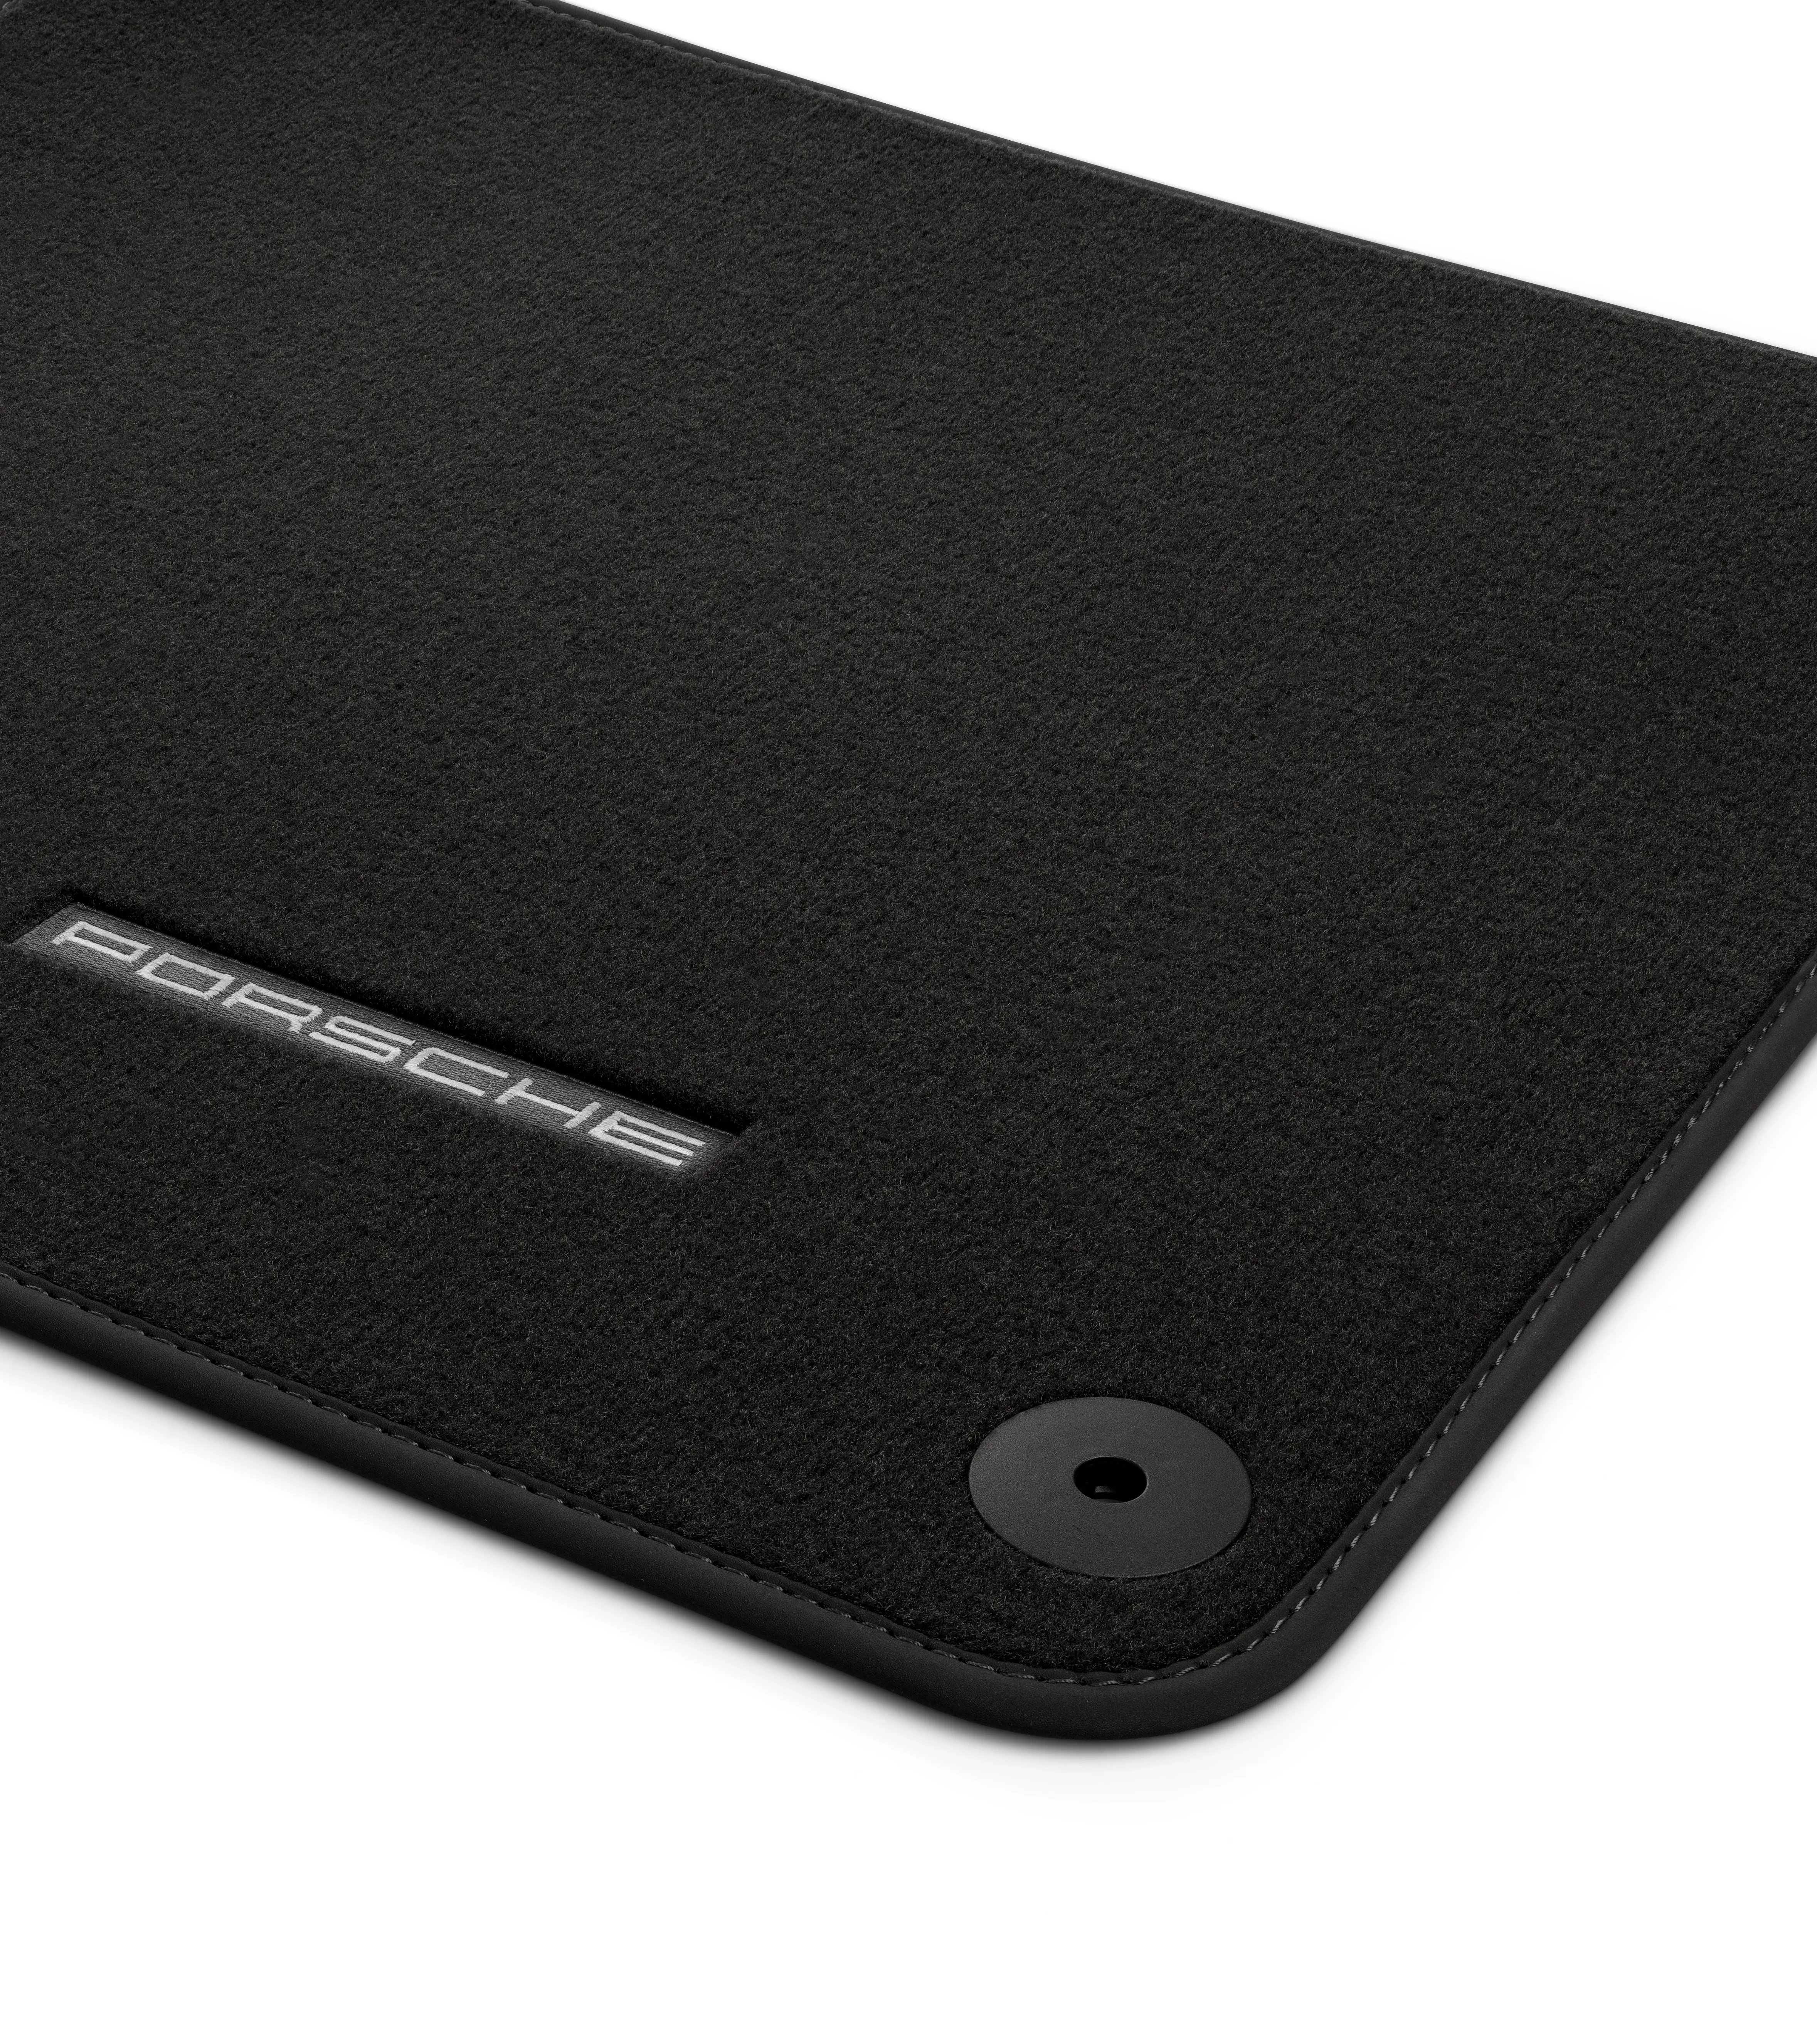 Carpeted Floor Mats with Nubuck Edging for 718 (982), Boxster